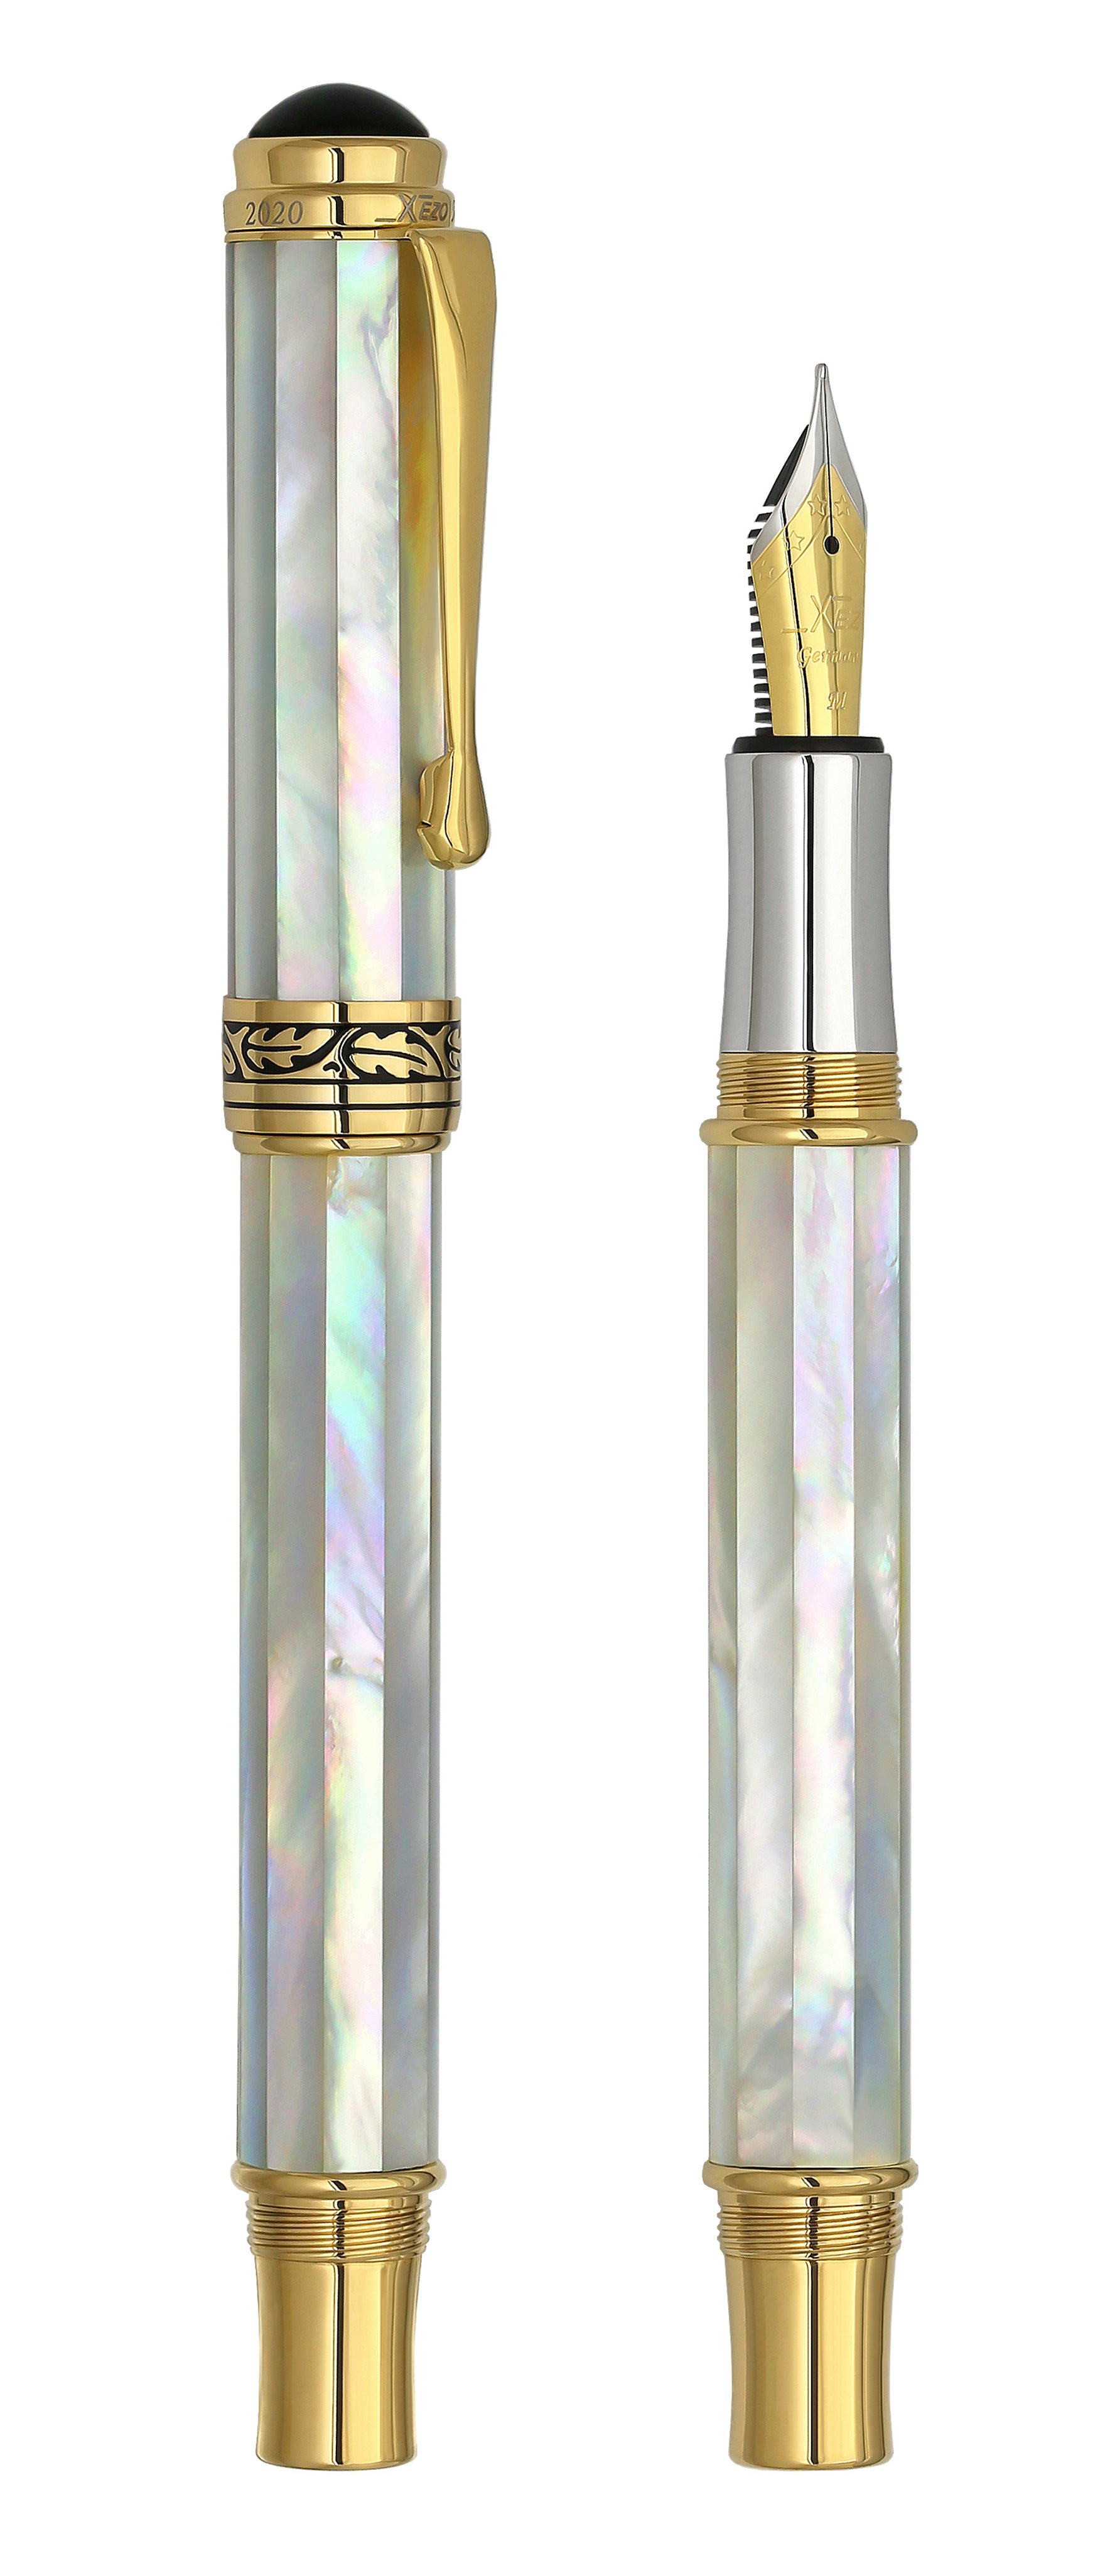 Vertical view of two Maestro White MOP FM fountain pens; the one on the left is capped, and the one on the right is uncapped